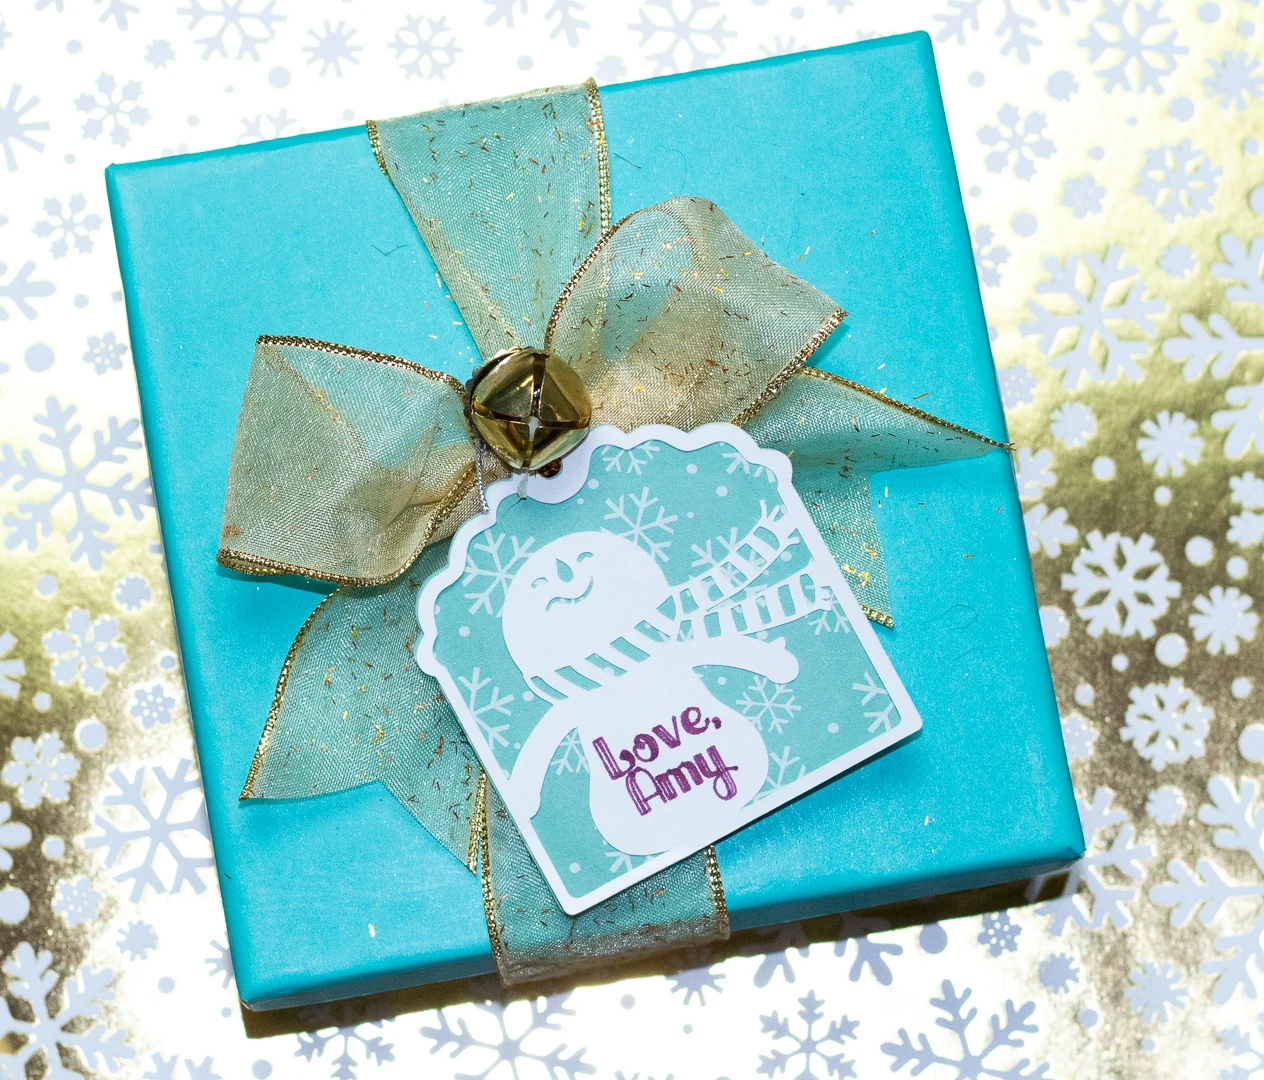 Cute snowman gift tag tied on gift with ribbon.